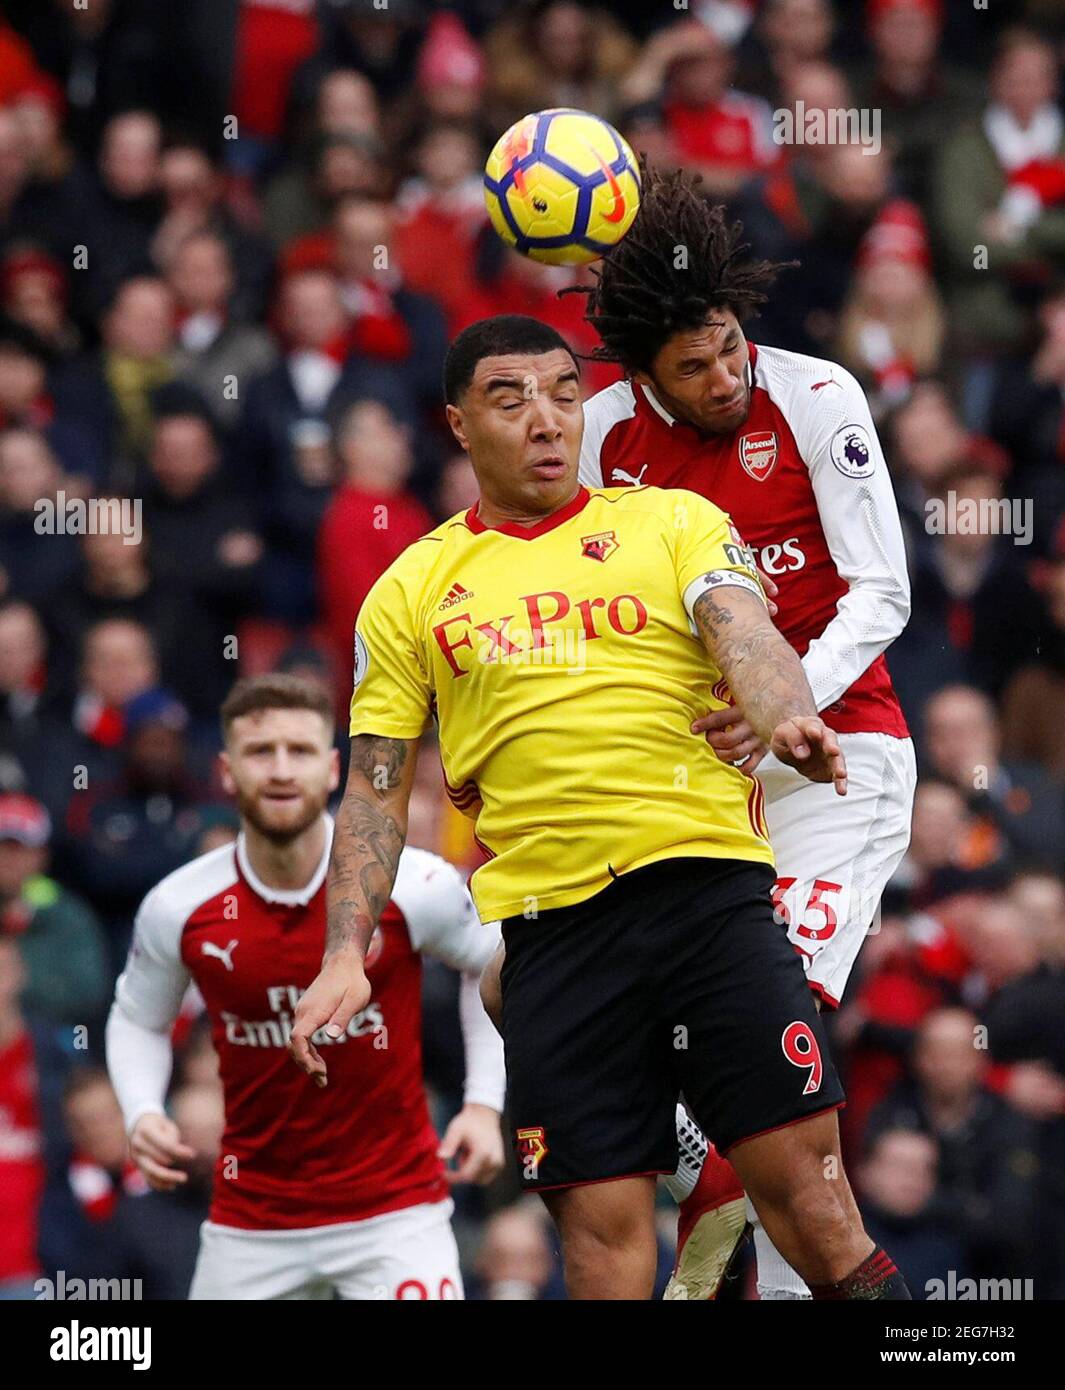 Soccer Football - Premier League - Arsenal vs Watford - Emirates Stadium, London, Britain - March 11, 2018   Watford's Troy Deeney in action with Arsenal's Mohamed Elneny       REUTERS/Eddie Keogh    EDITORIAL USE ONLY. No use with unauthorized audio, video, data, fixture lists, club/league logos or "live" services. Online in-match use limited to 75 images, no video emulation. No use in betting, games or single club/league/player publications.  Please contact your account representative for further details. Stock Photo